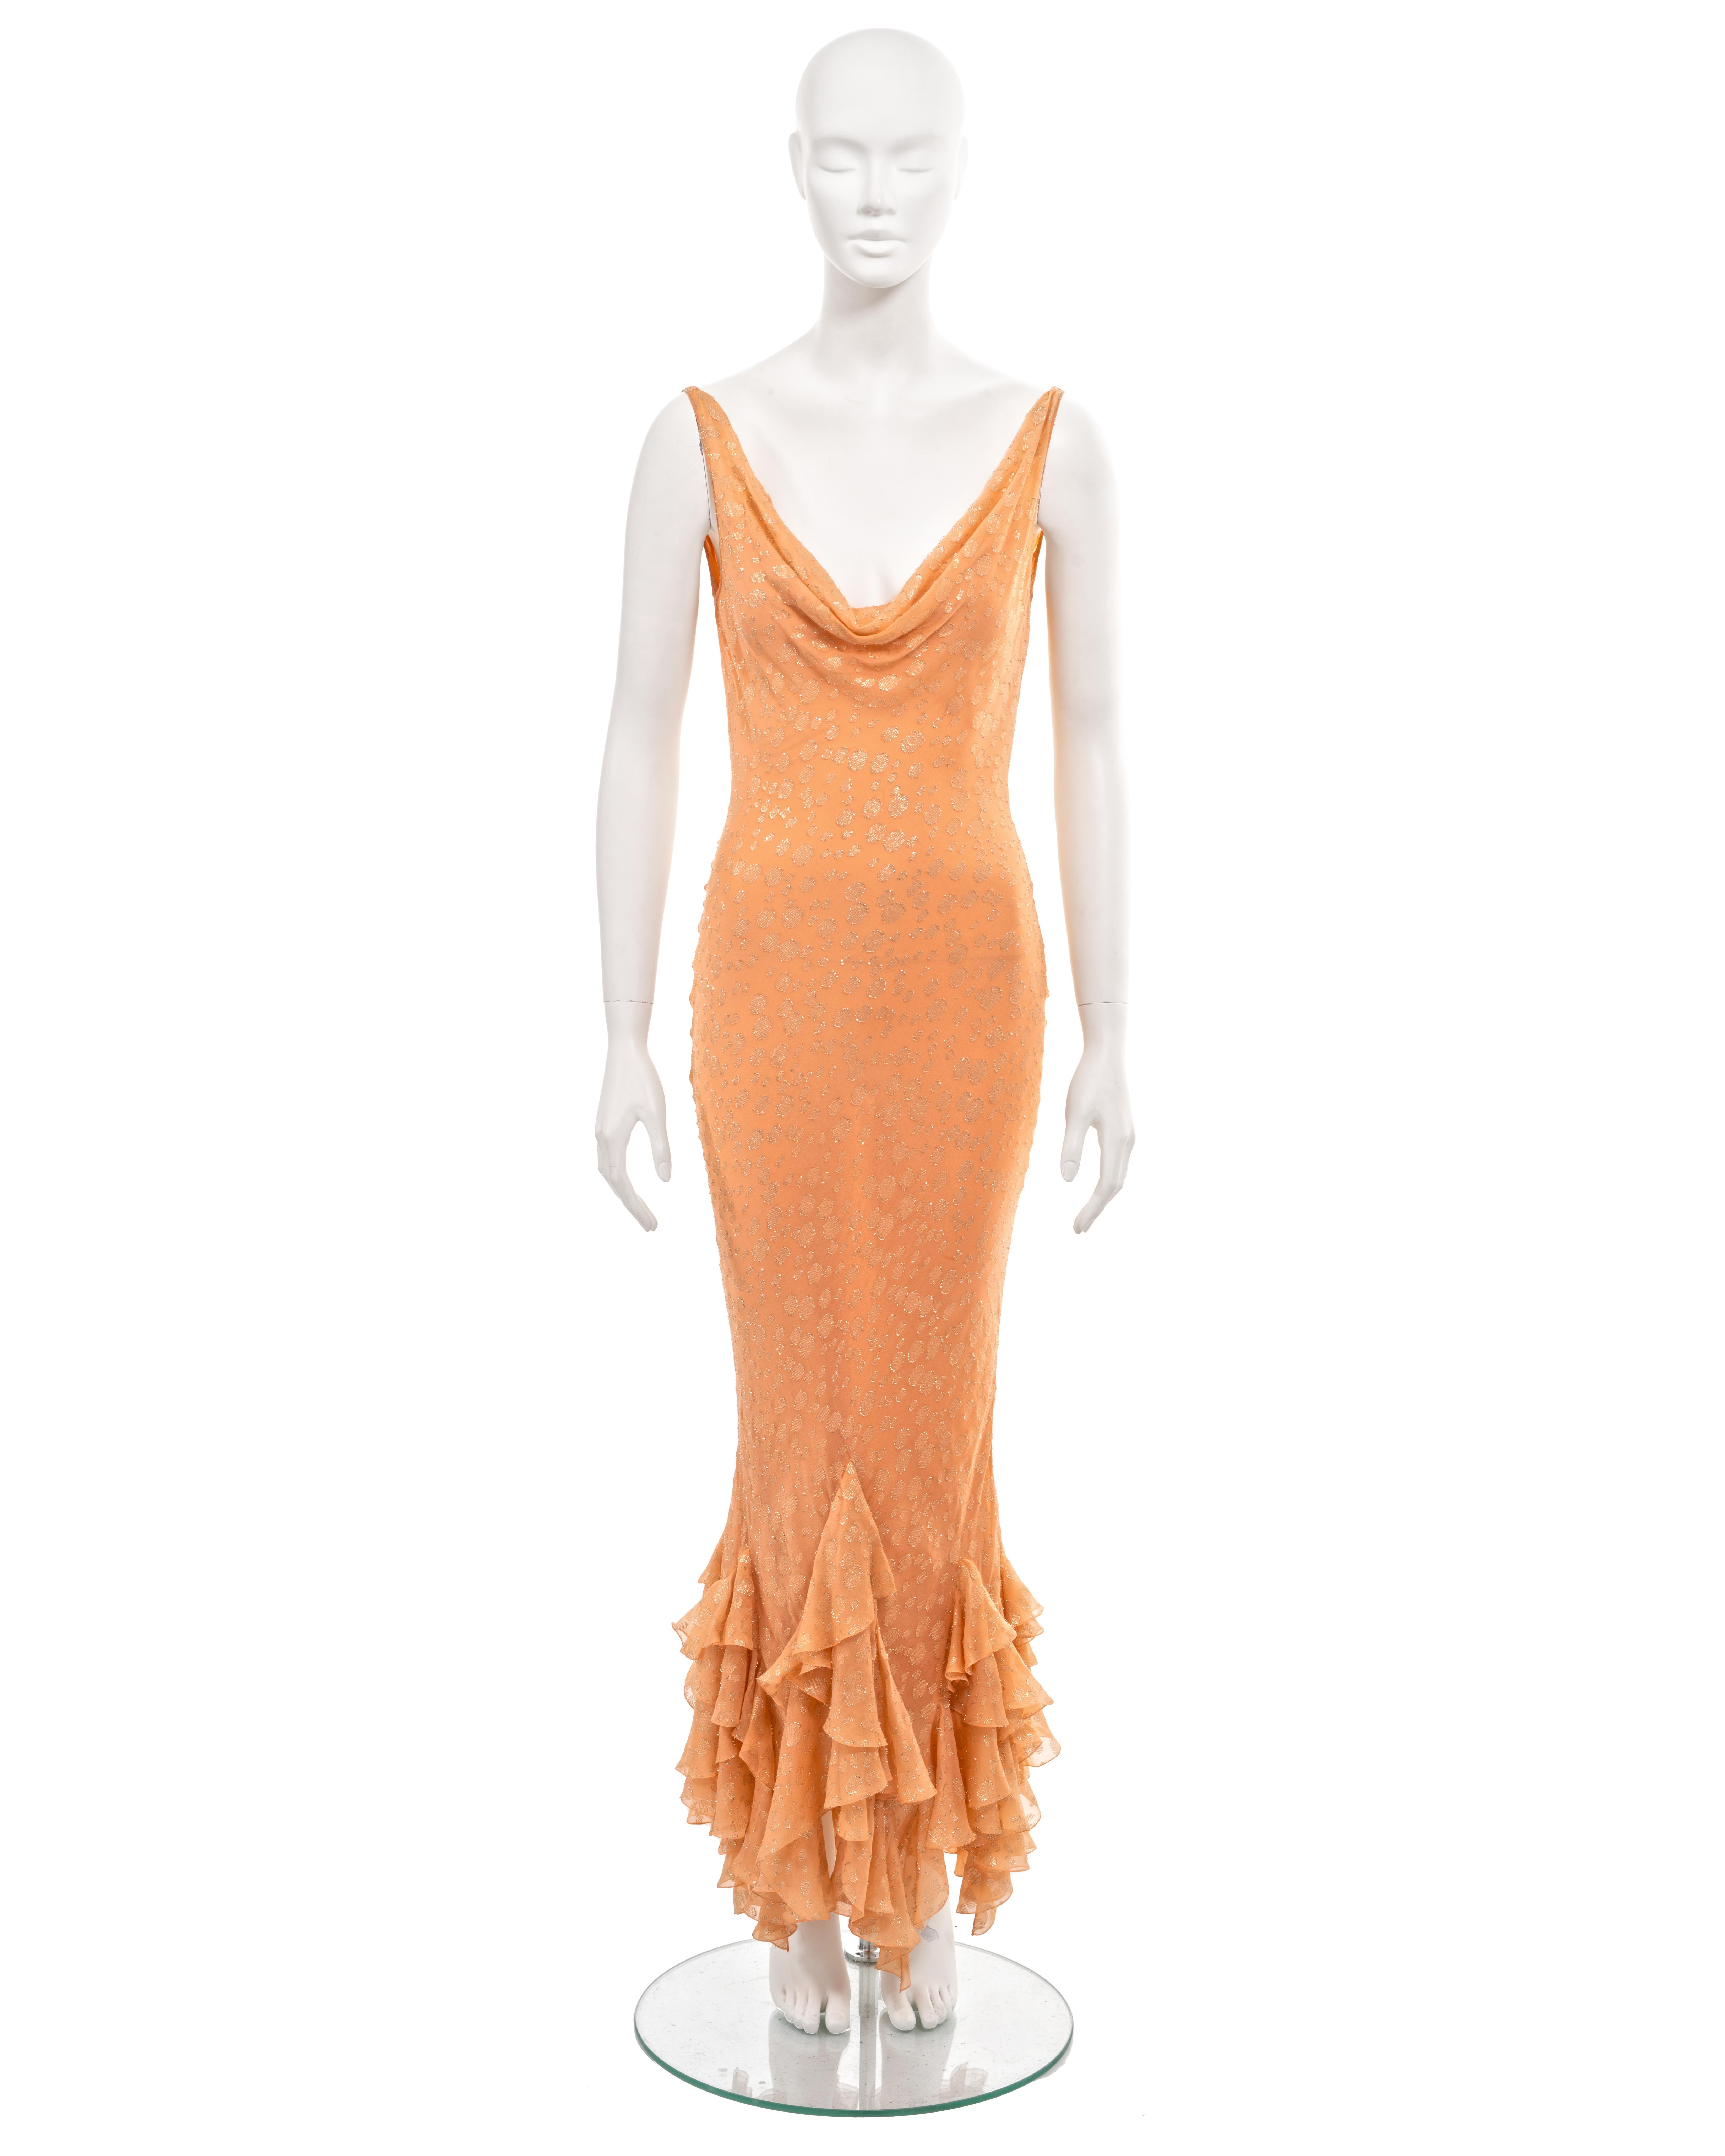 ▪ John Galliano evening dress
▪ Sold by One of a Kind Archive
▪ Spring-Summer 2004
▪ Peach silk chiffon with allover woven gold lurex spotted motif 
▪ Plunging cowls to the front and back necklines 
▪ Floor-length skirt with tiered ruffled hem 
▪